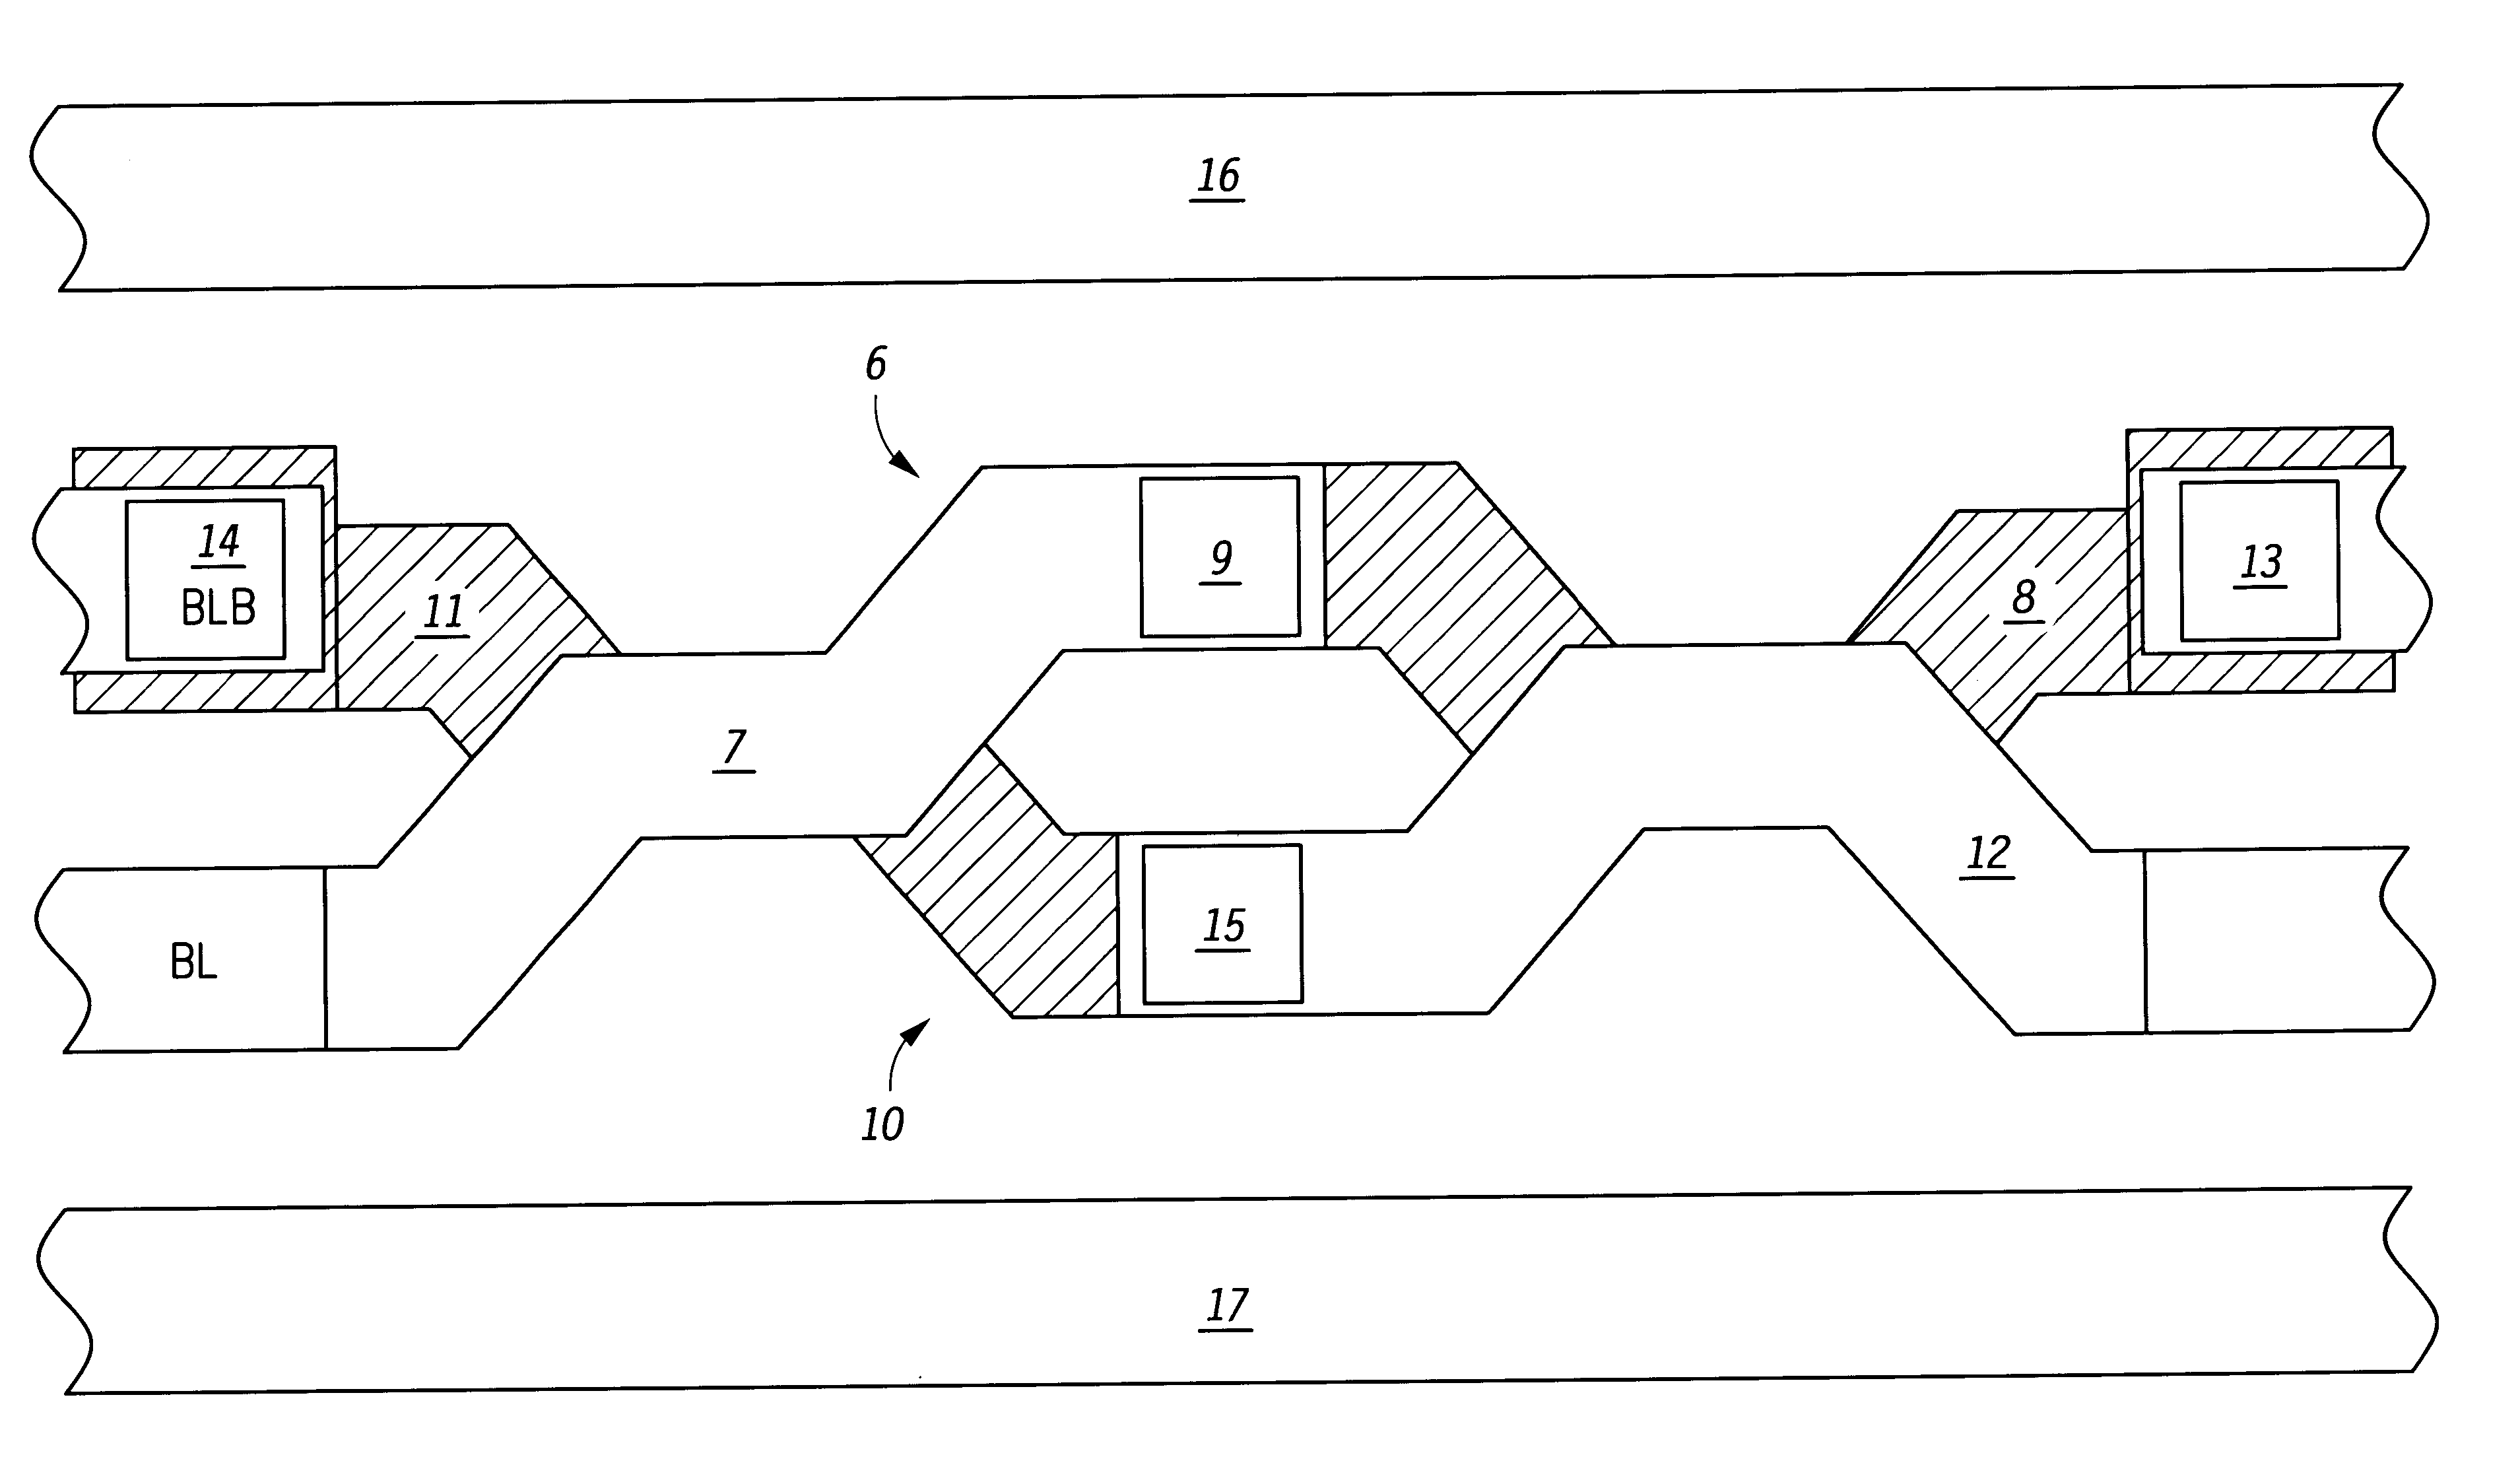 Integrated circuit having a balanced twist for differential signal lines